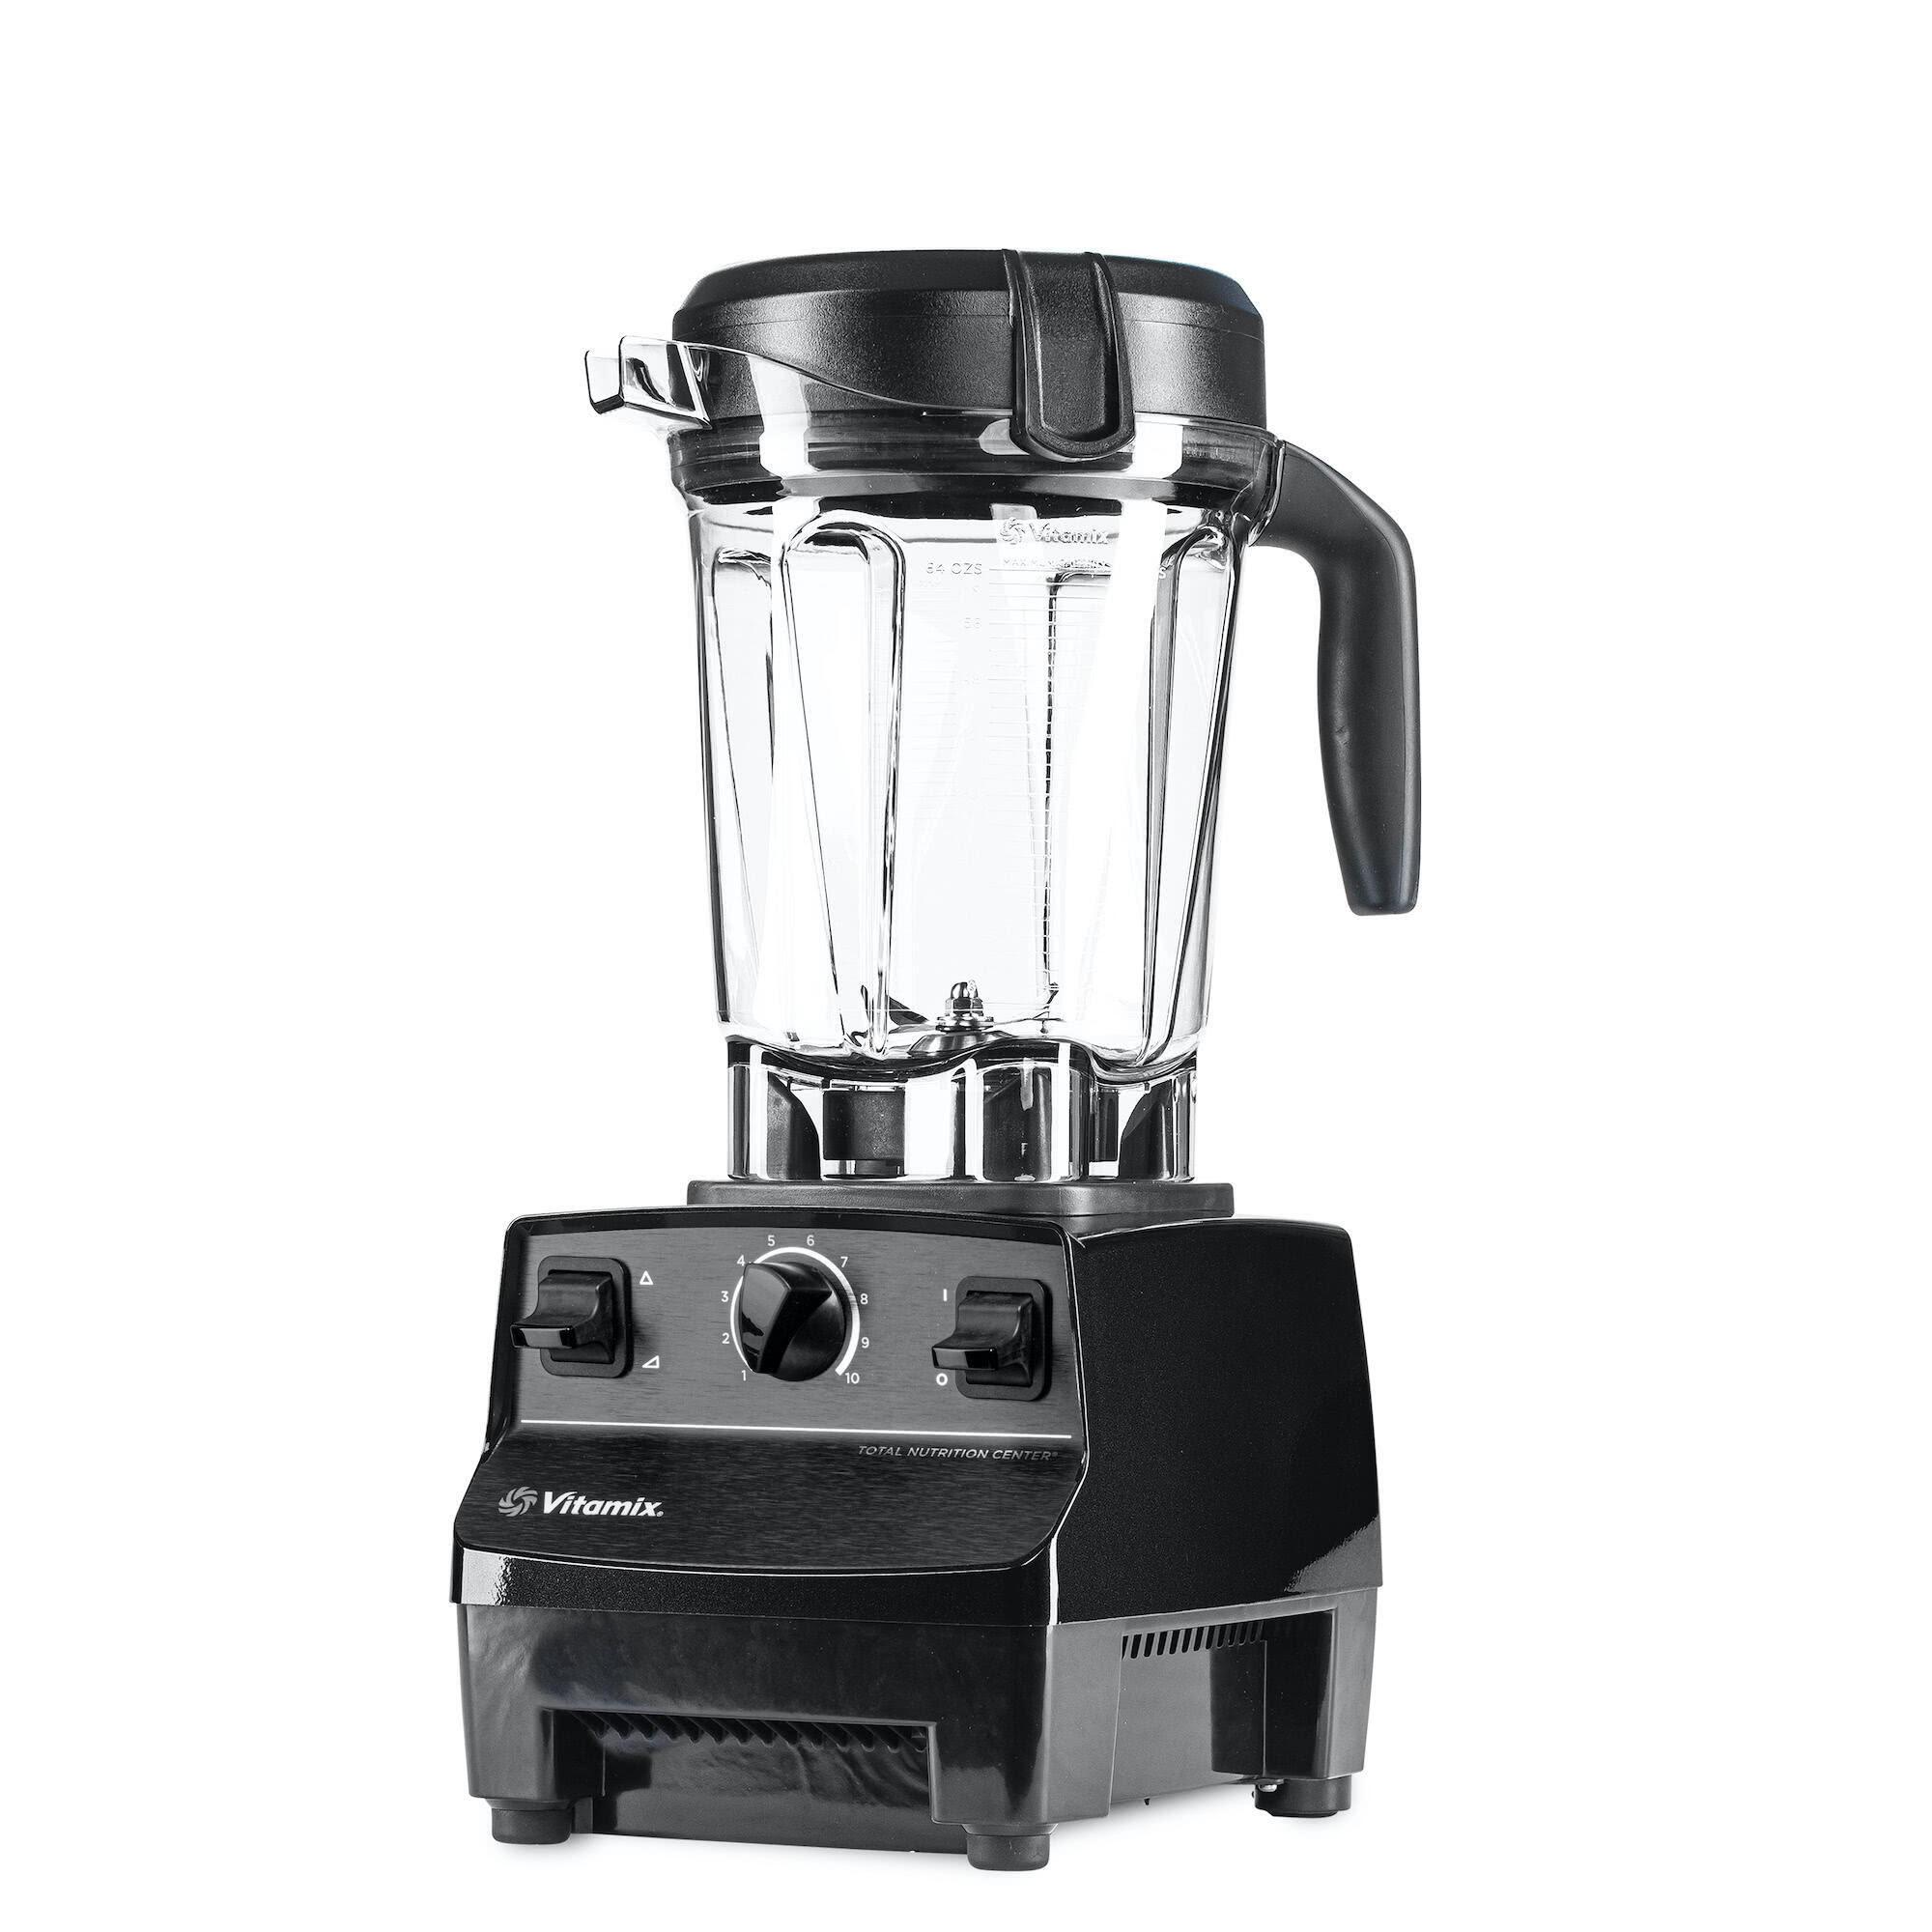  Professional Blender for Shakes and Smoothies, Nut Butters,  Soups, Dips, Hummus, Milks - 9-Speed - Versatile Kitchen Appliance with 2  HP Motor - 64oz BPA-Free Tritan Carafe: Home & Kitchen